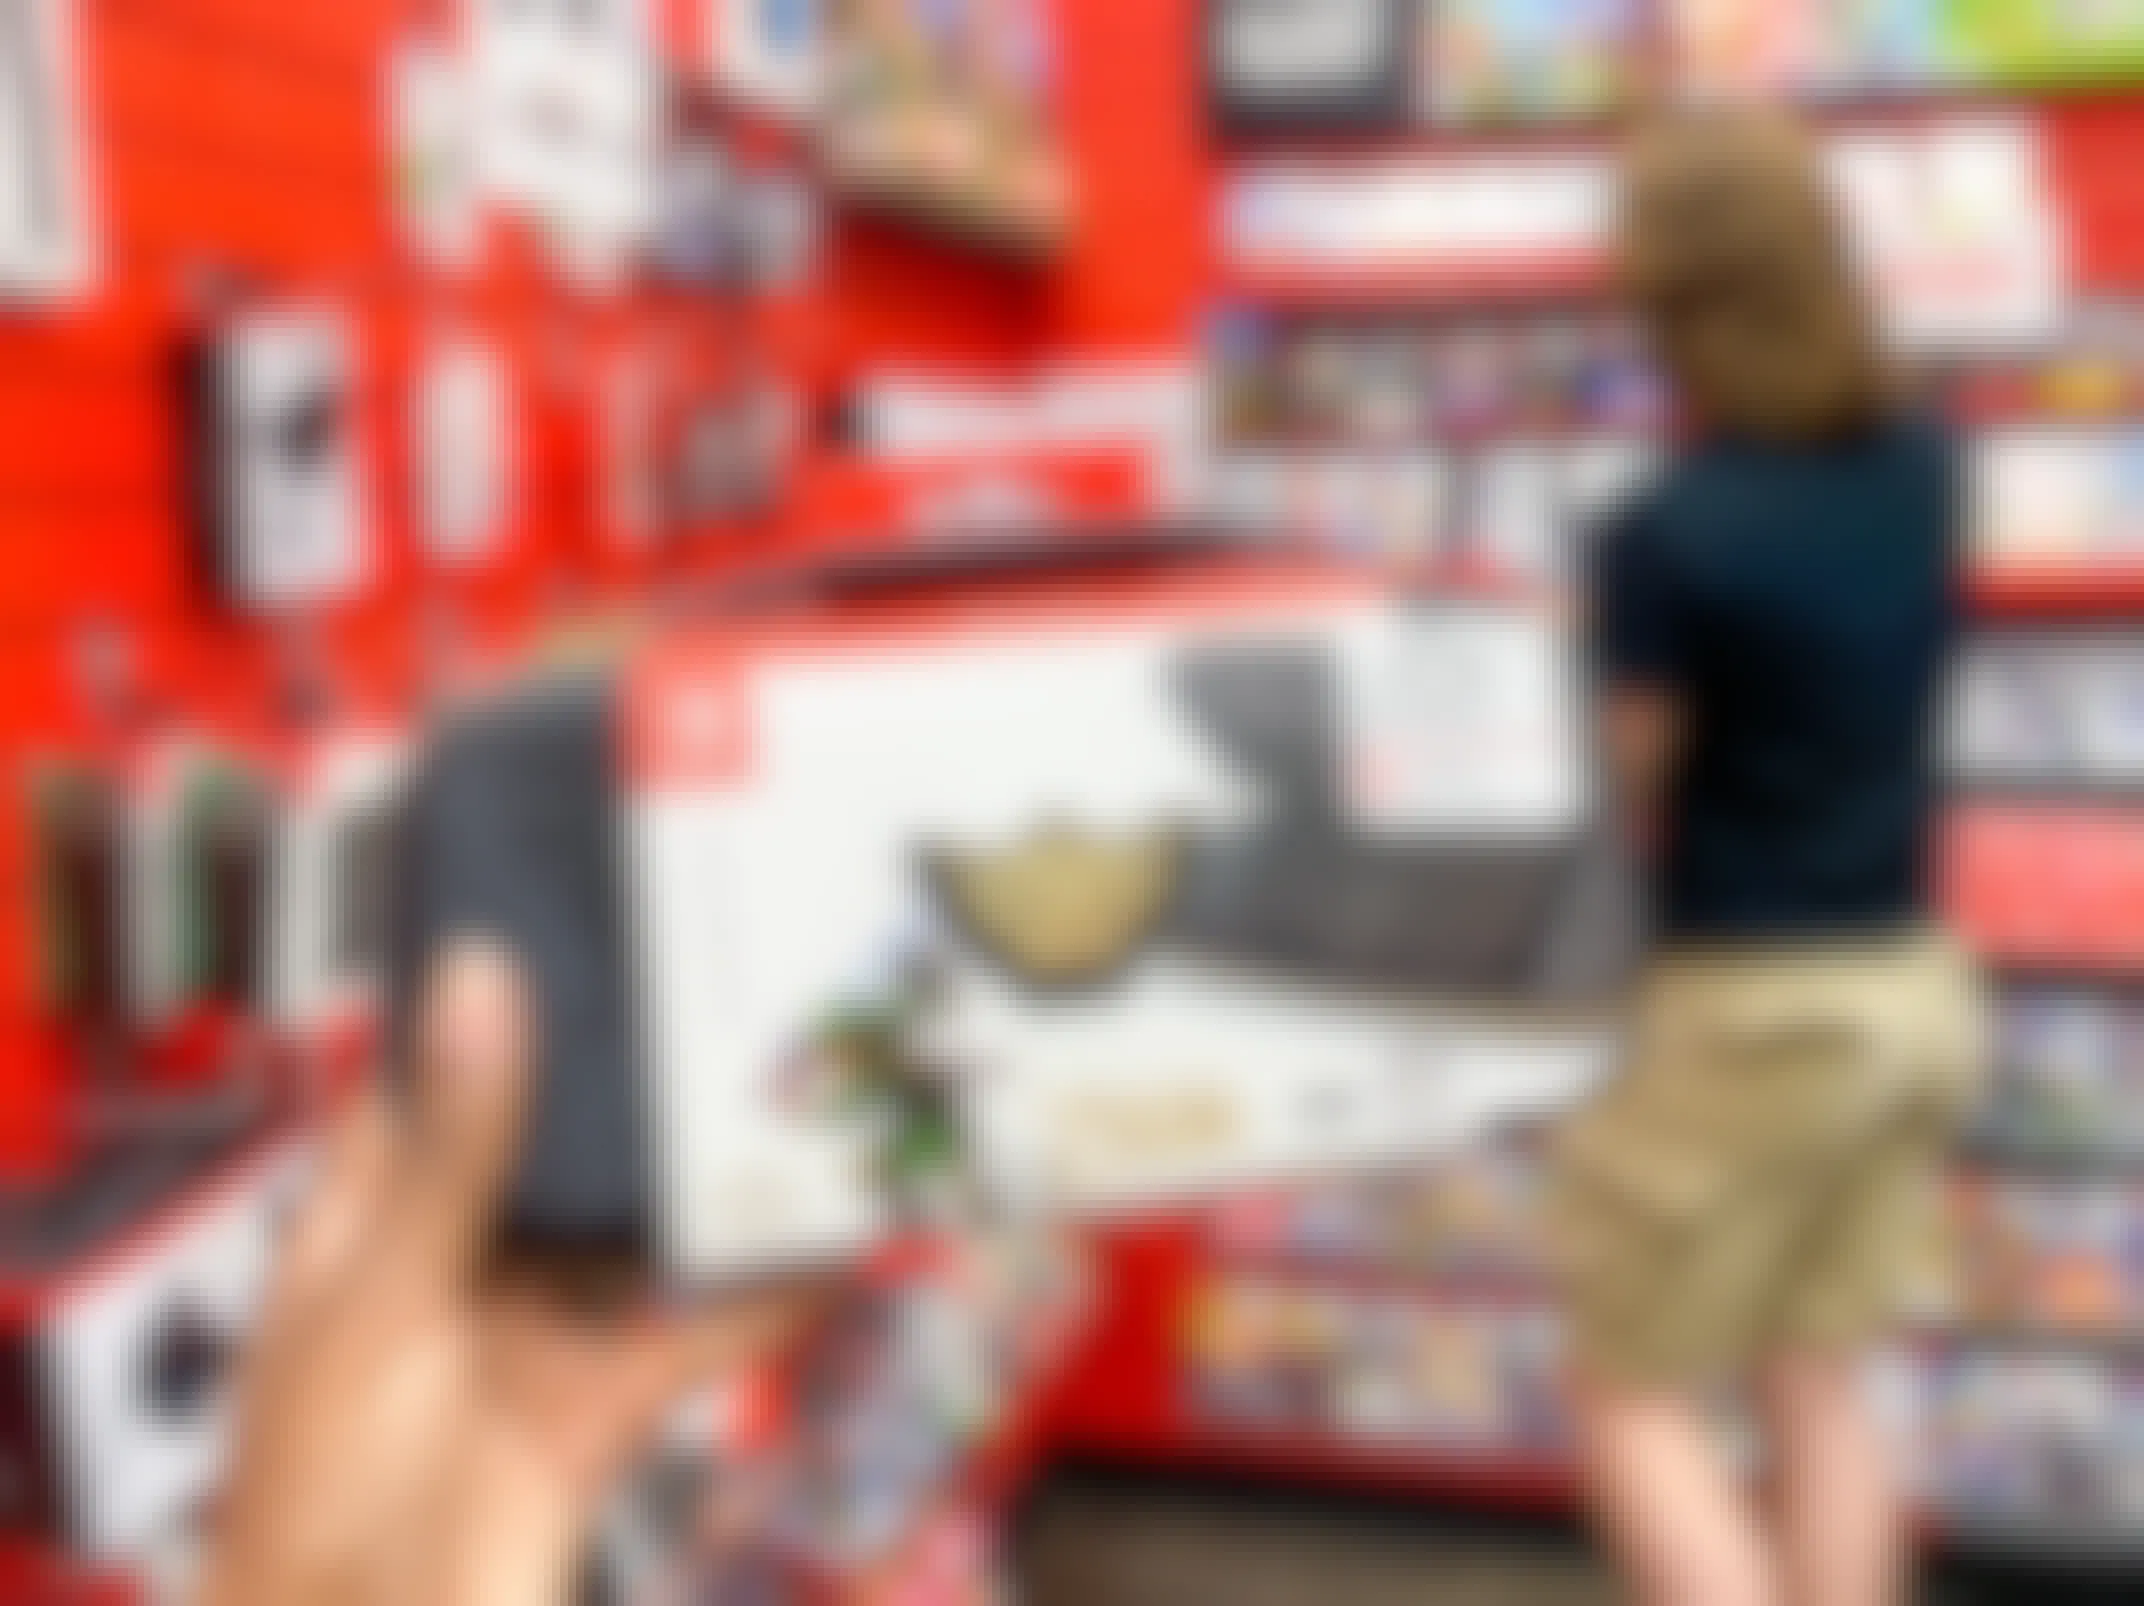 A person's hand holding up a Nintendo Switch Legend of Zelda carrying case inside a GameStop store with someone looking at games in the background.